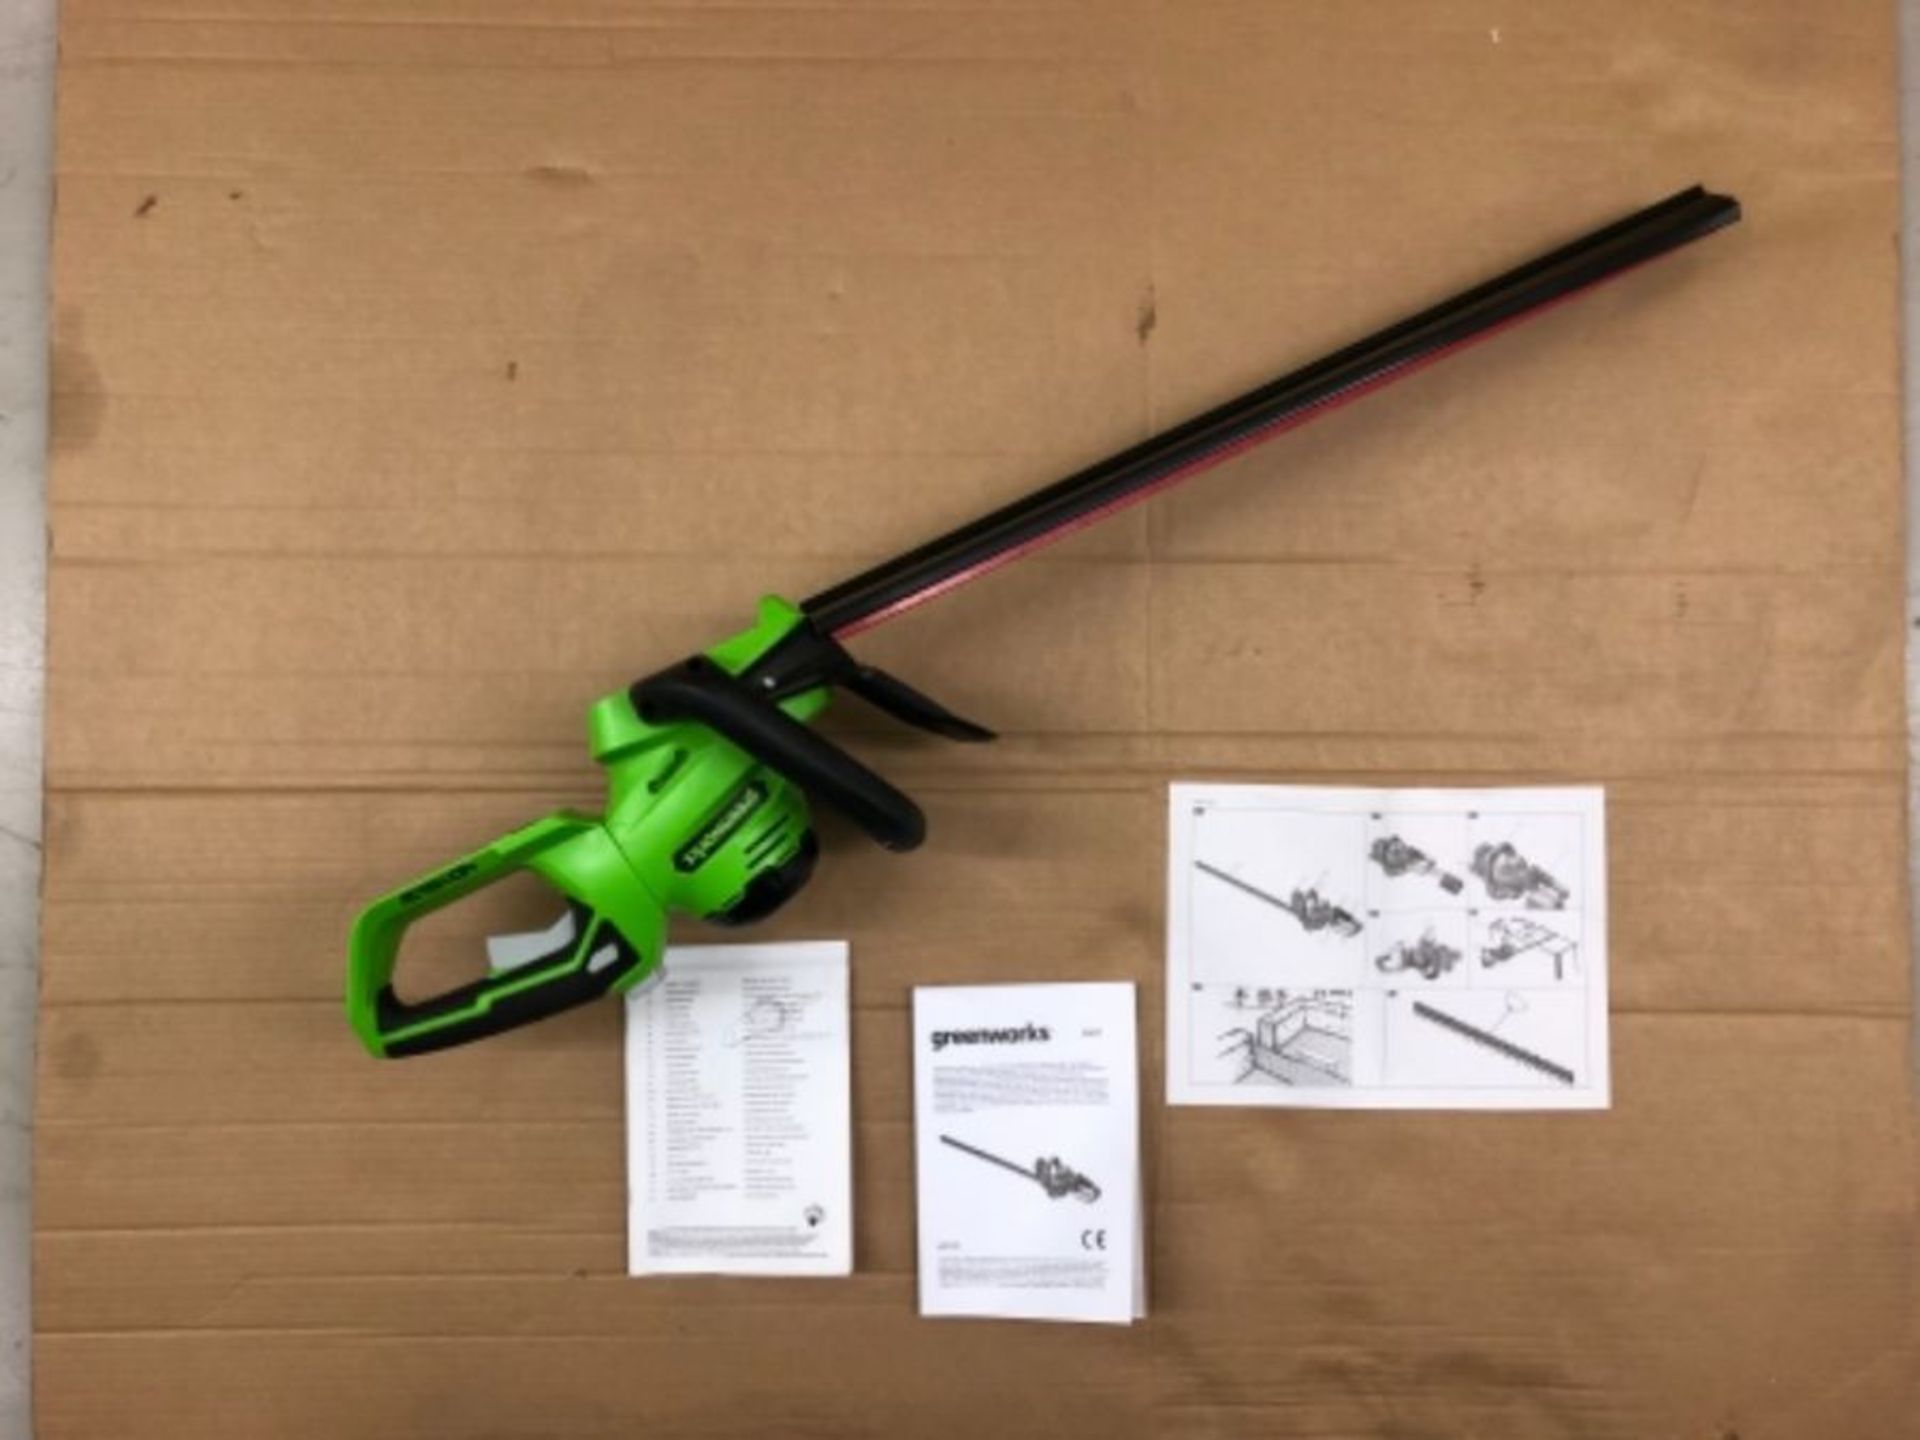 RRP £80.00 Greenworks Battery Hedge Trimmer G40HT (Li-Ion 40V 61cm Cutting Length 27 mm Tooth Spa - Image 2 of 2